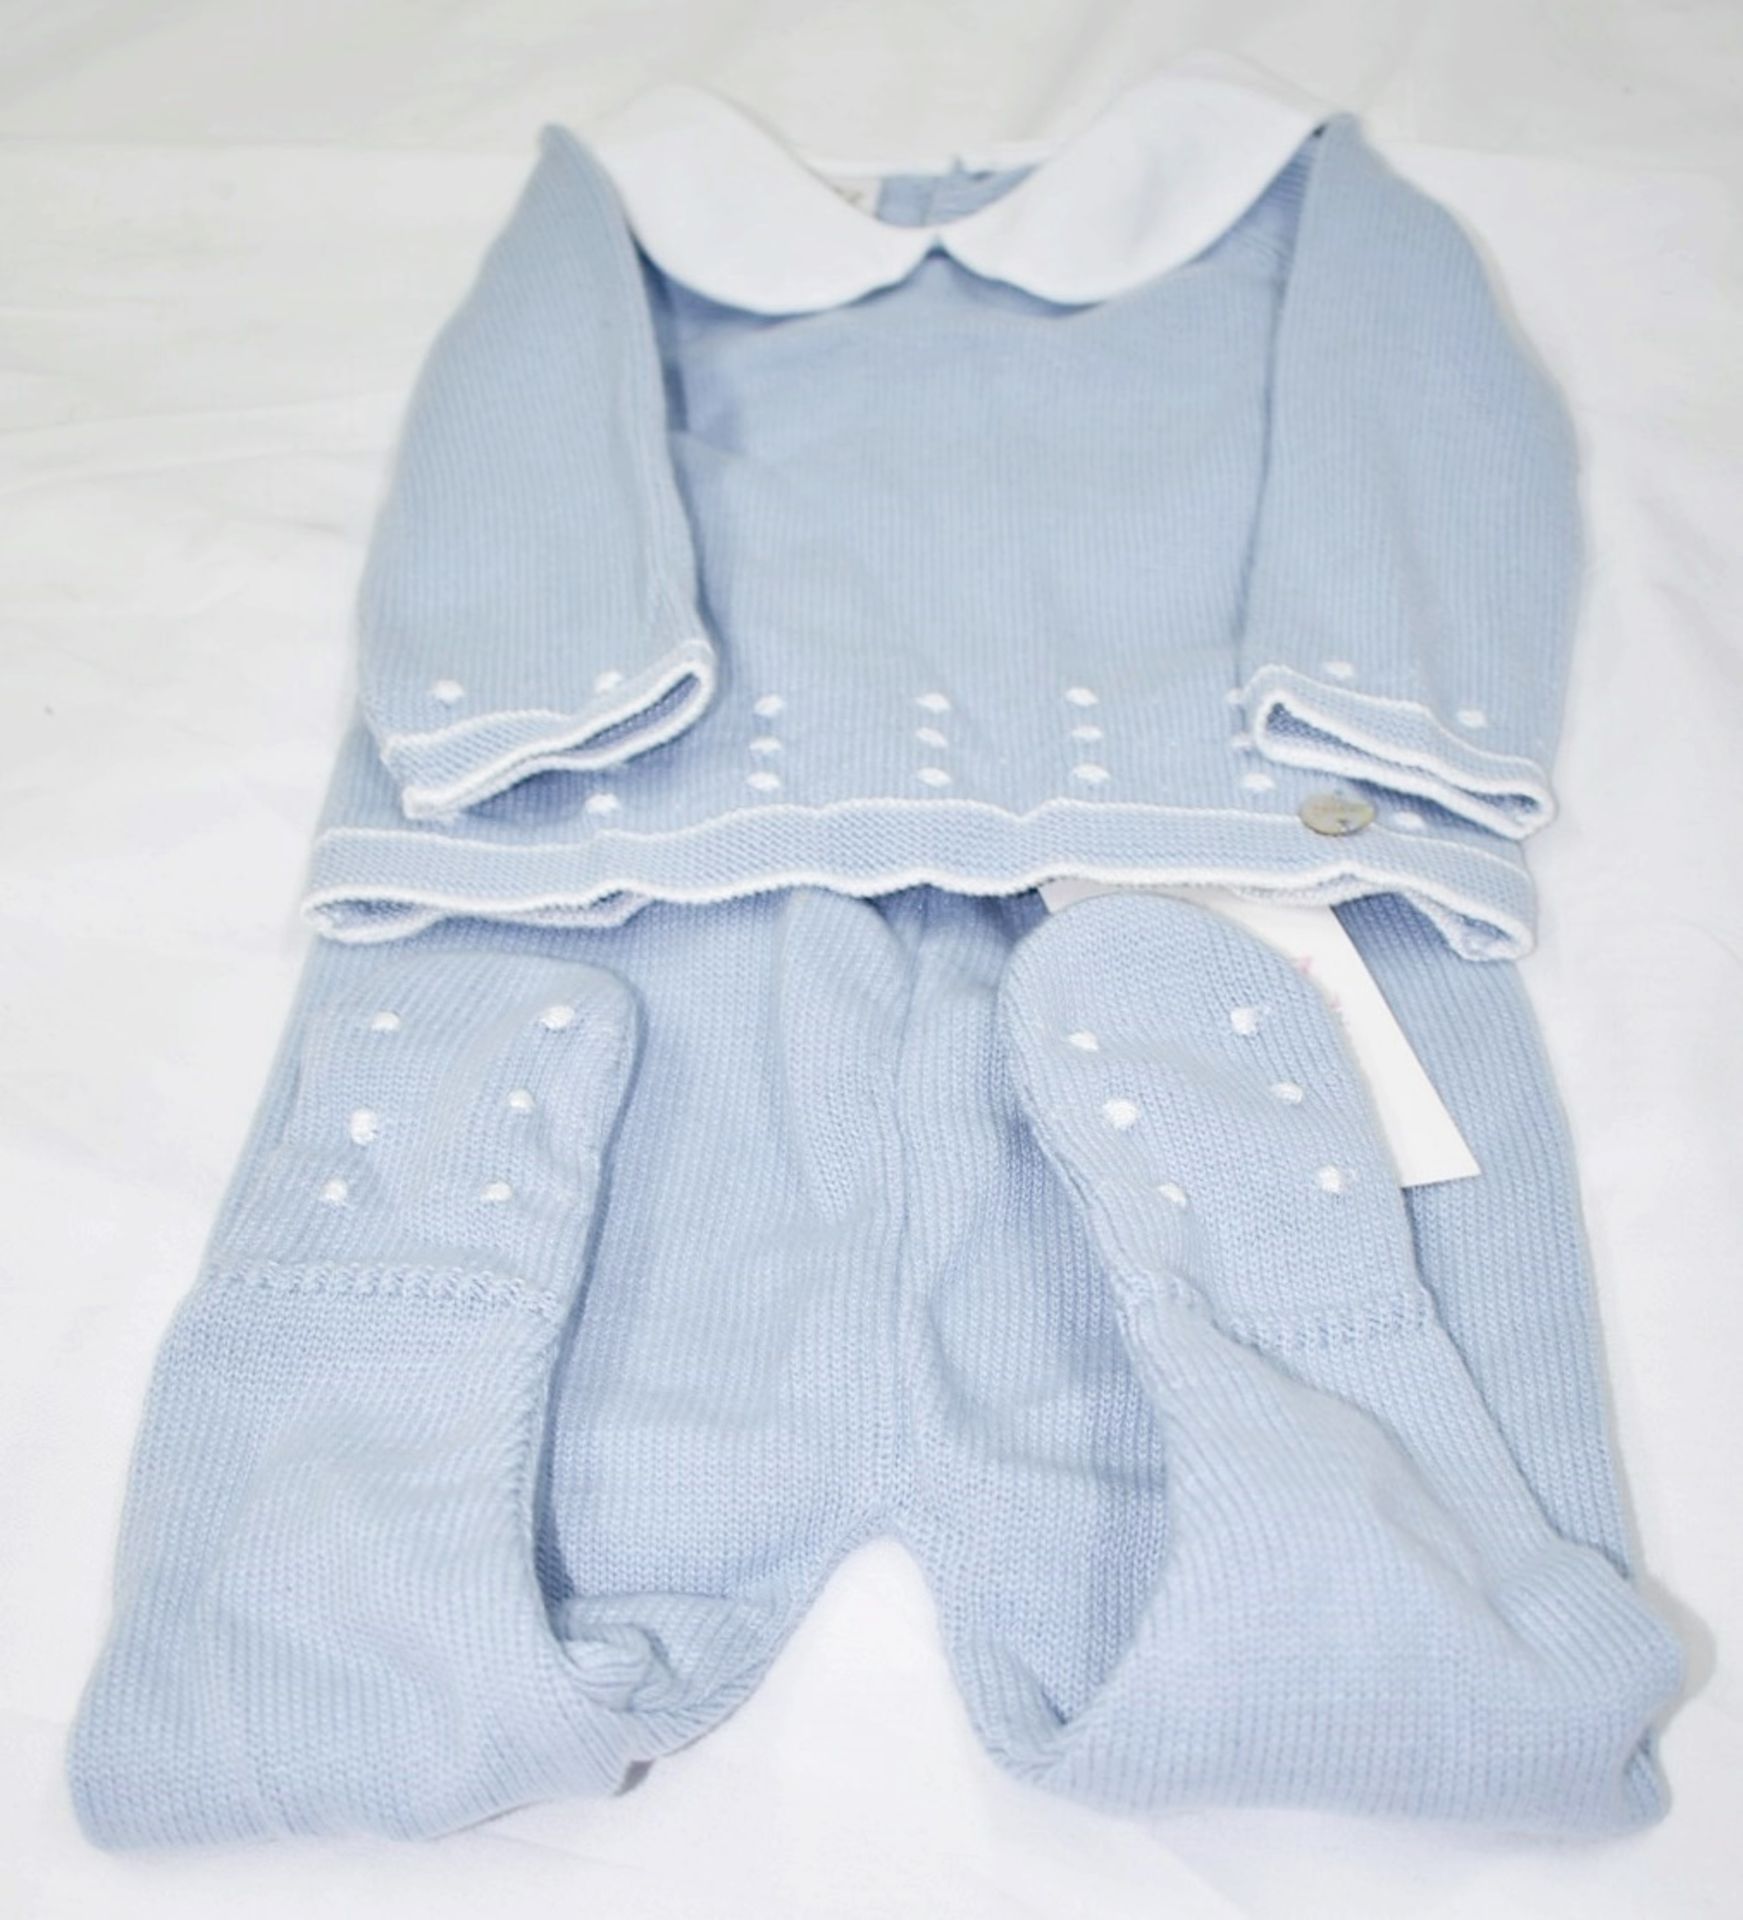 1 x PAZ RODRIGUEZ 2-Piece Knitted (Sweater, Pants) Set, in Cloud Blue, 6mth - Original Price £79.95 - Image 2 of 7